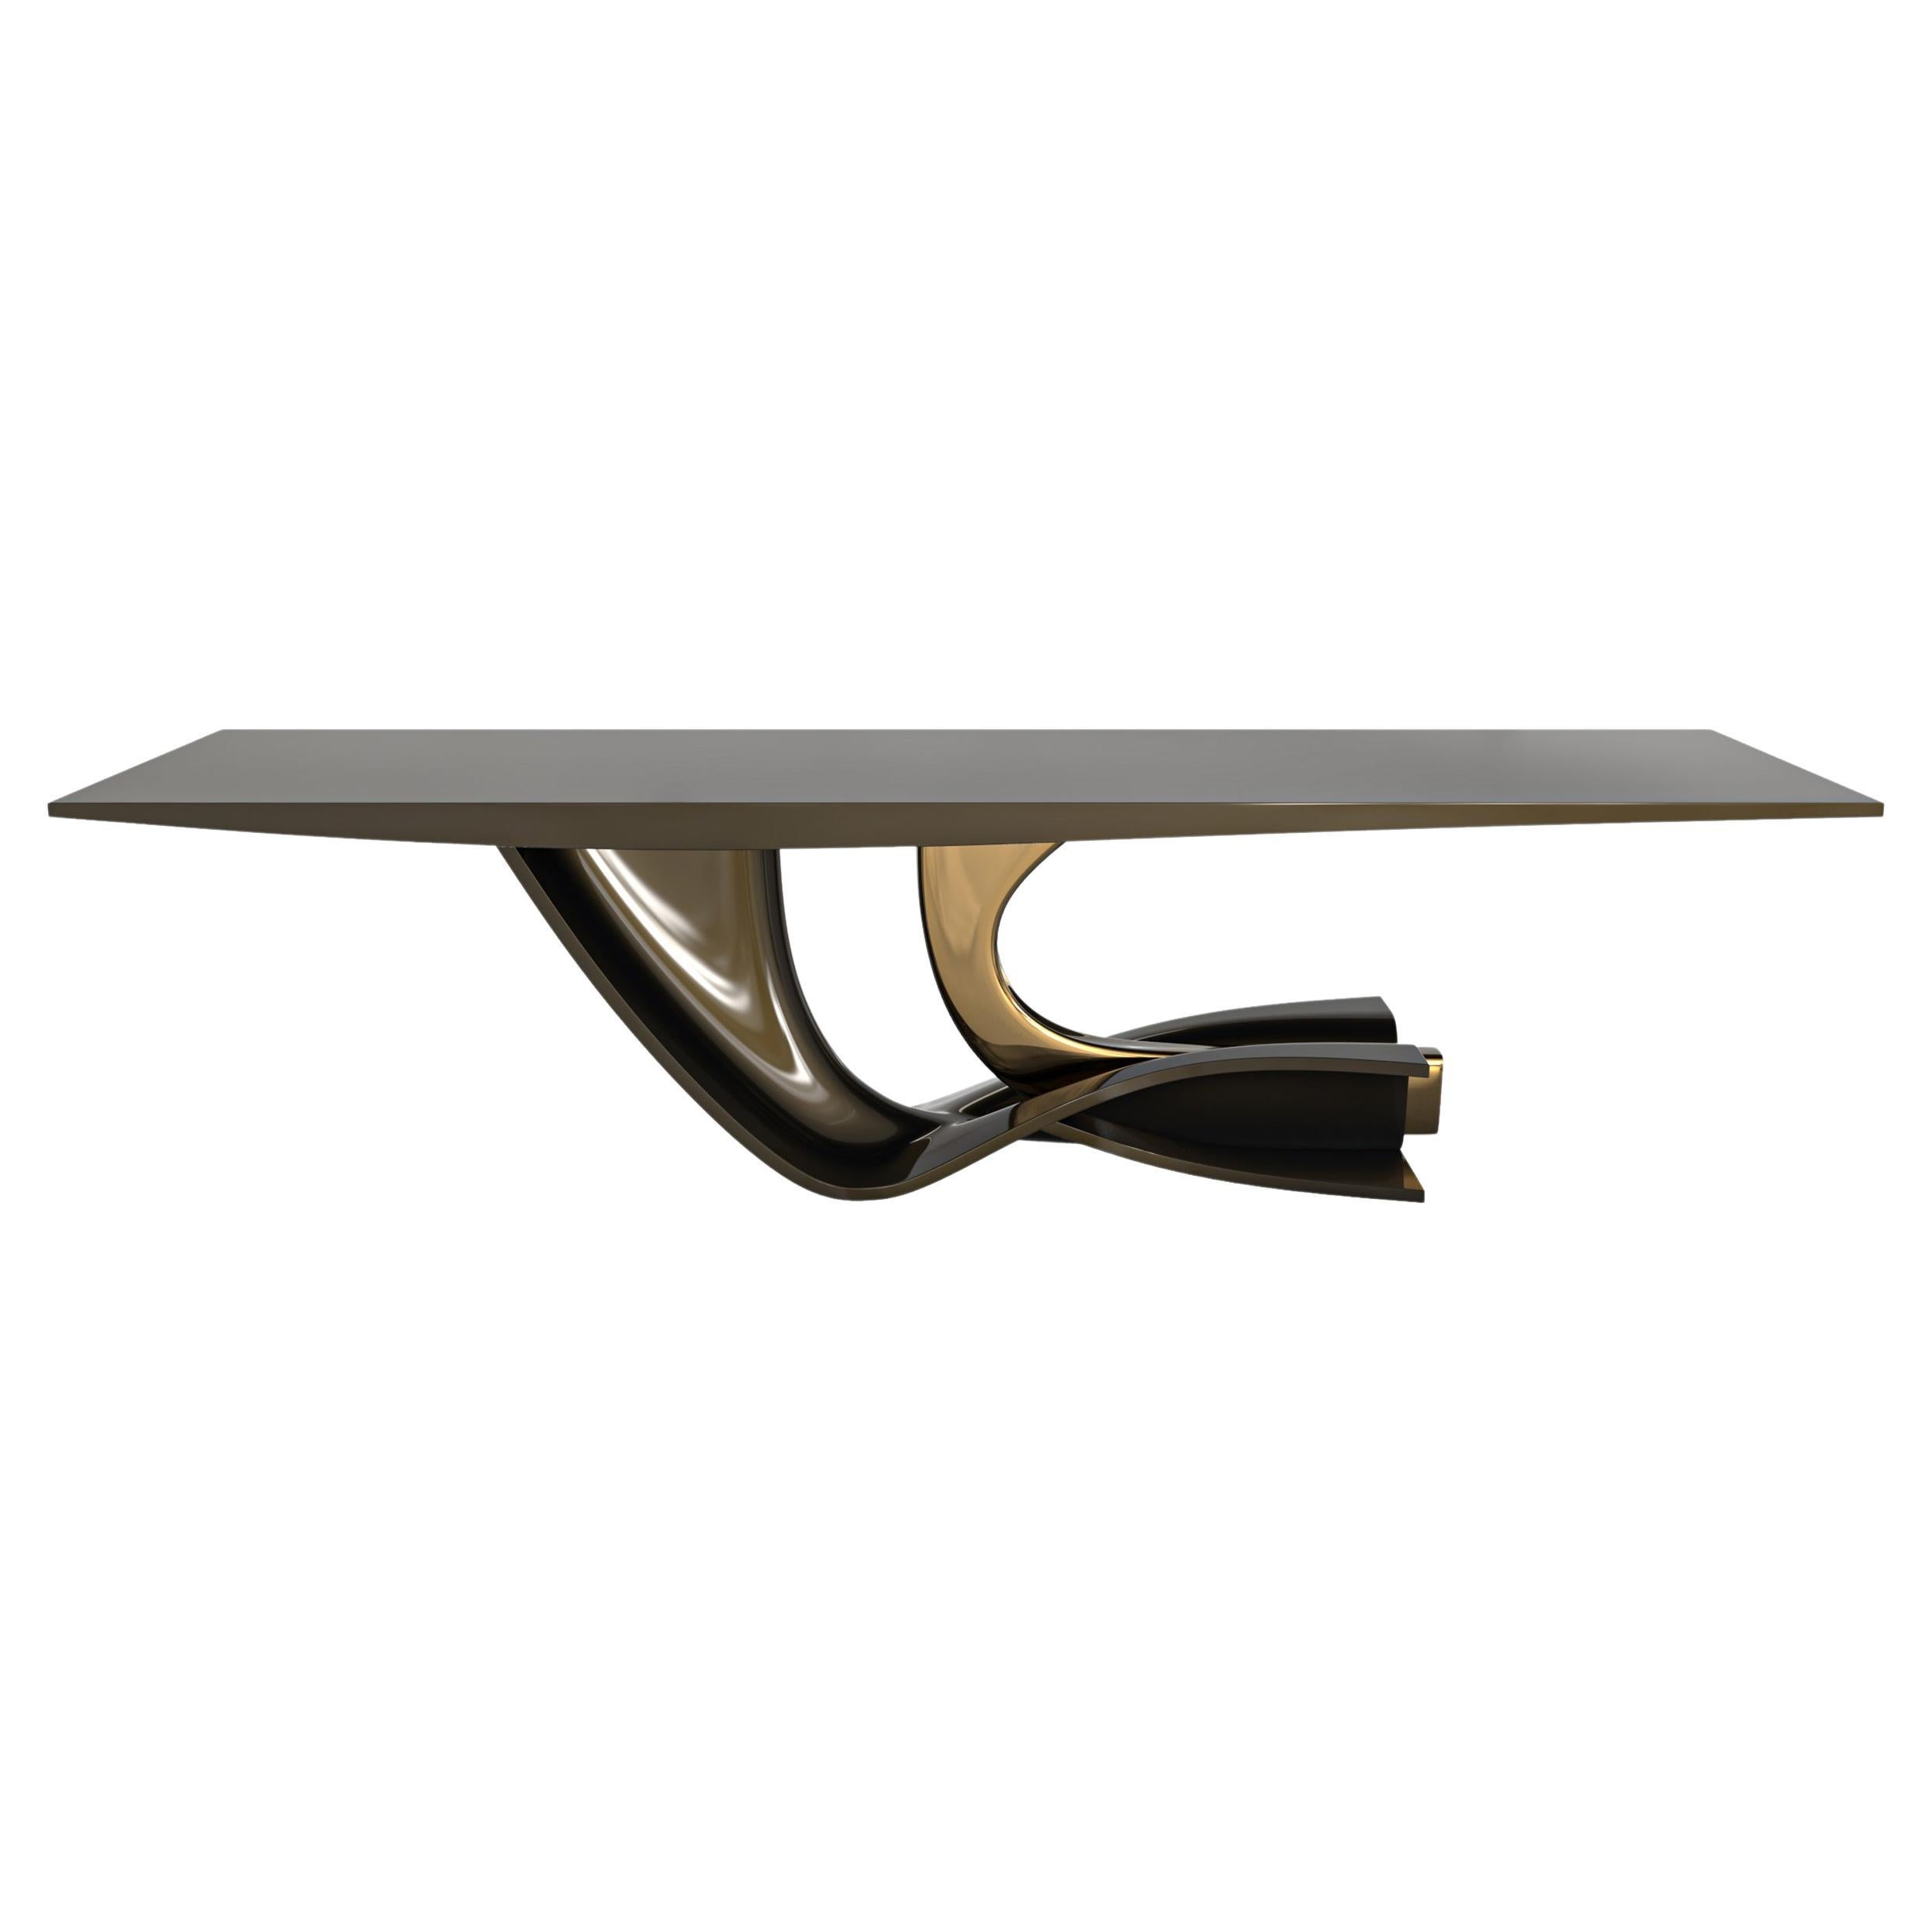 "Respiro" Limited Edition Table with Stainless Steel and Bronze, Istanbul For Sale